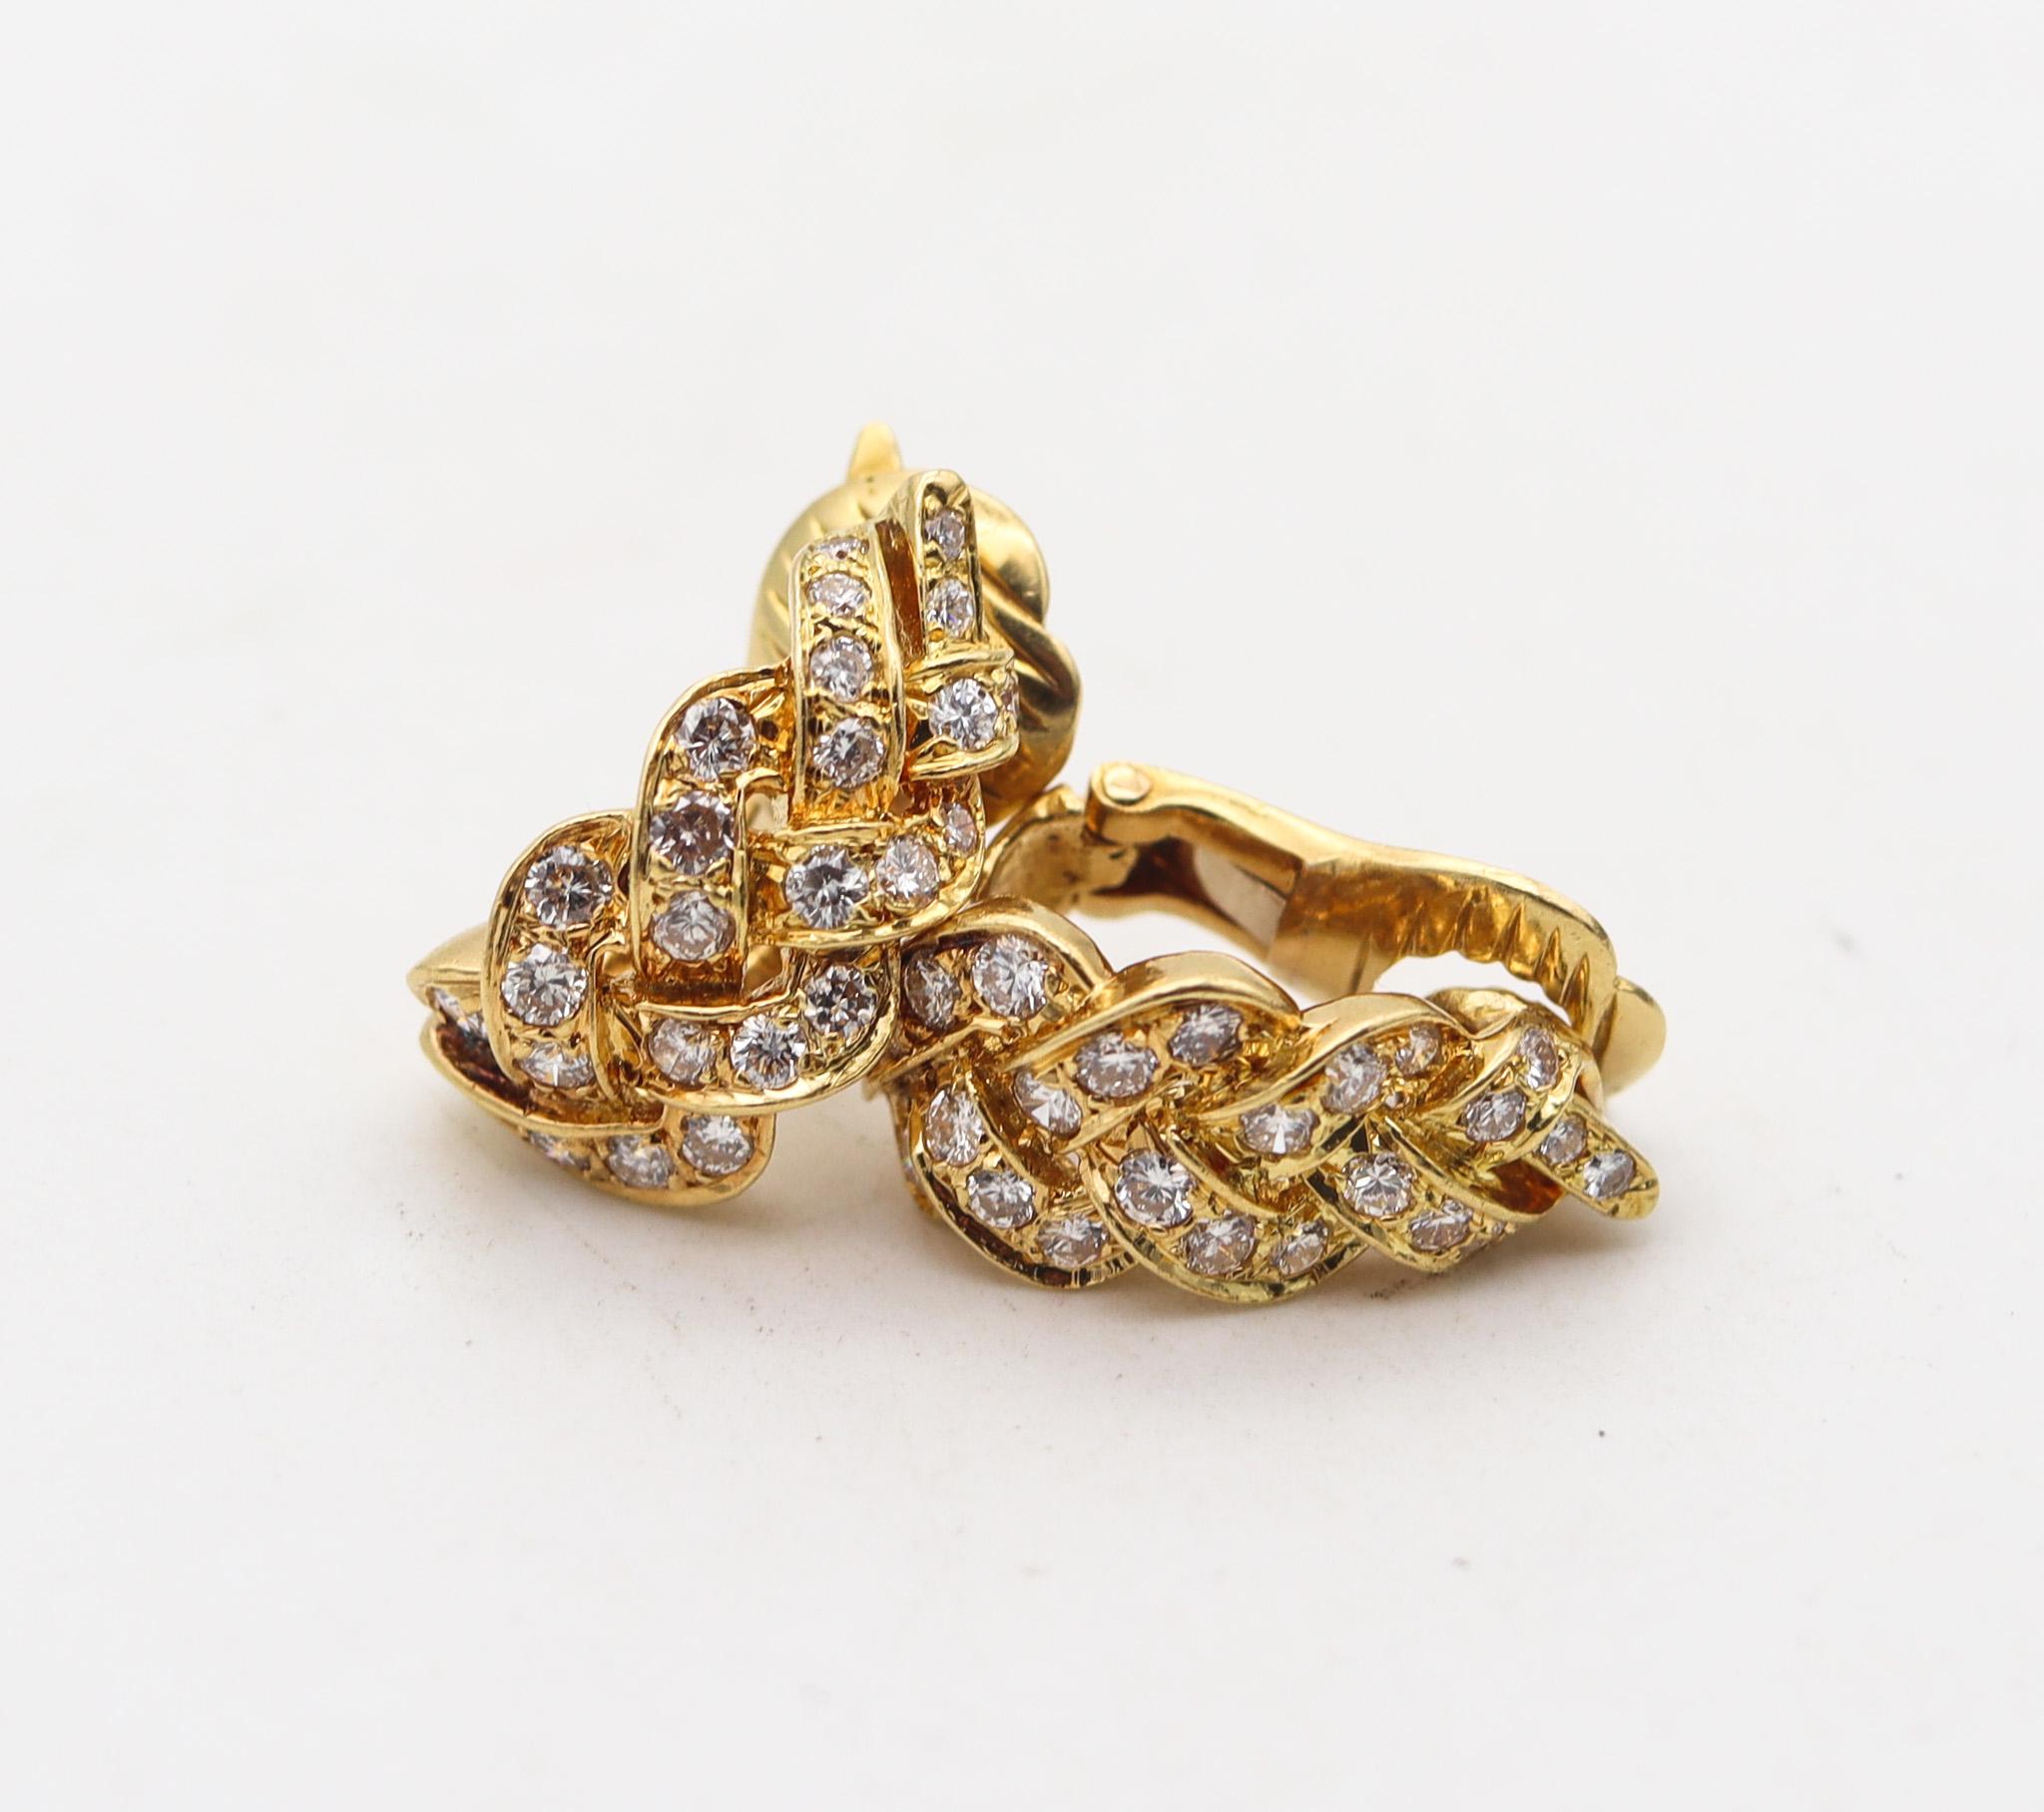 Fred Of Paris Hoops Earrings In 18Kt Yellow Gold With 2.64 Ctw In VS Diamonds In Excellent Condition For Sale In Miami, FL